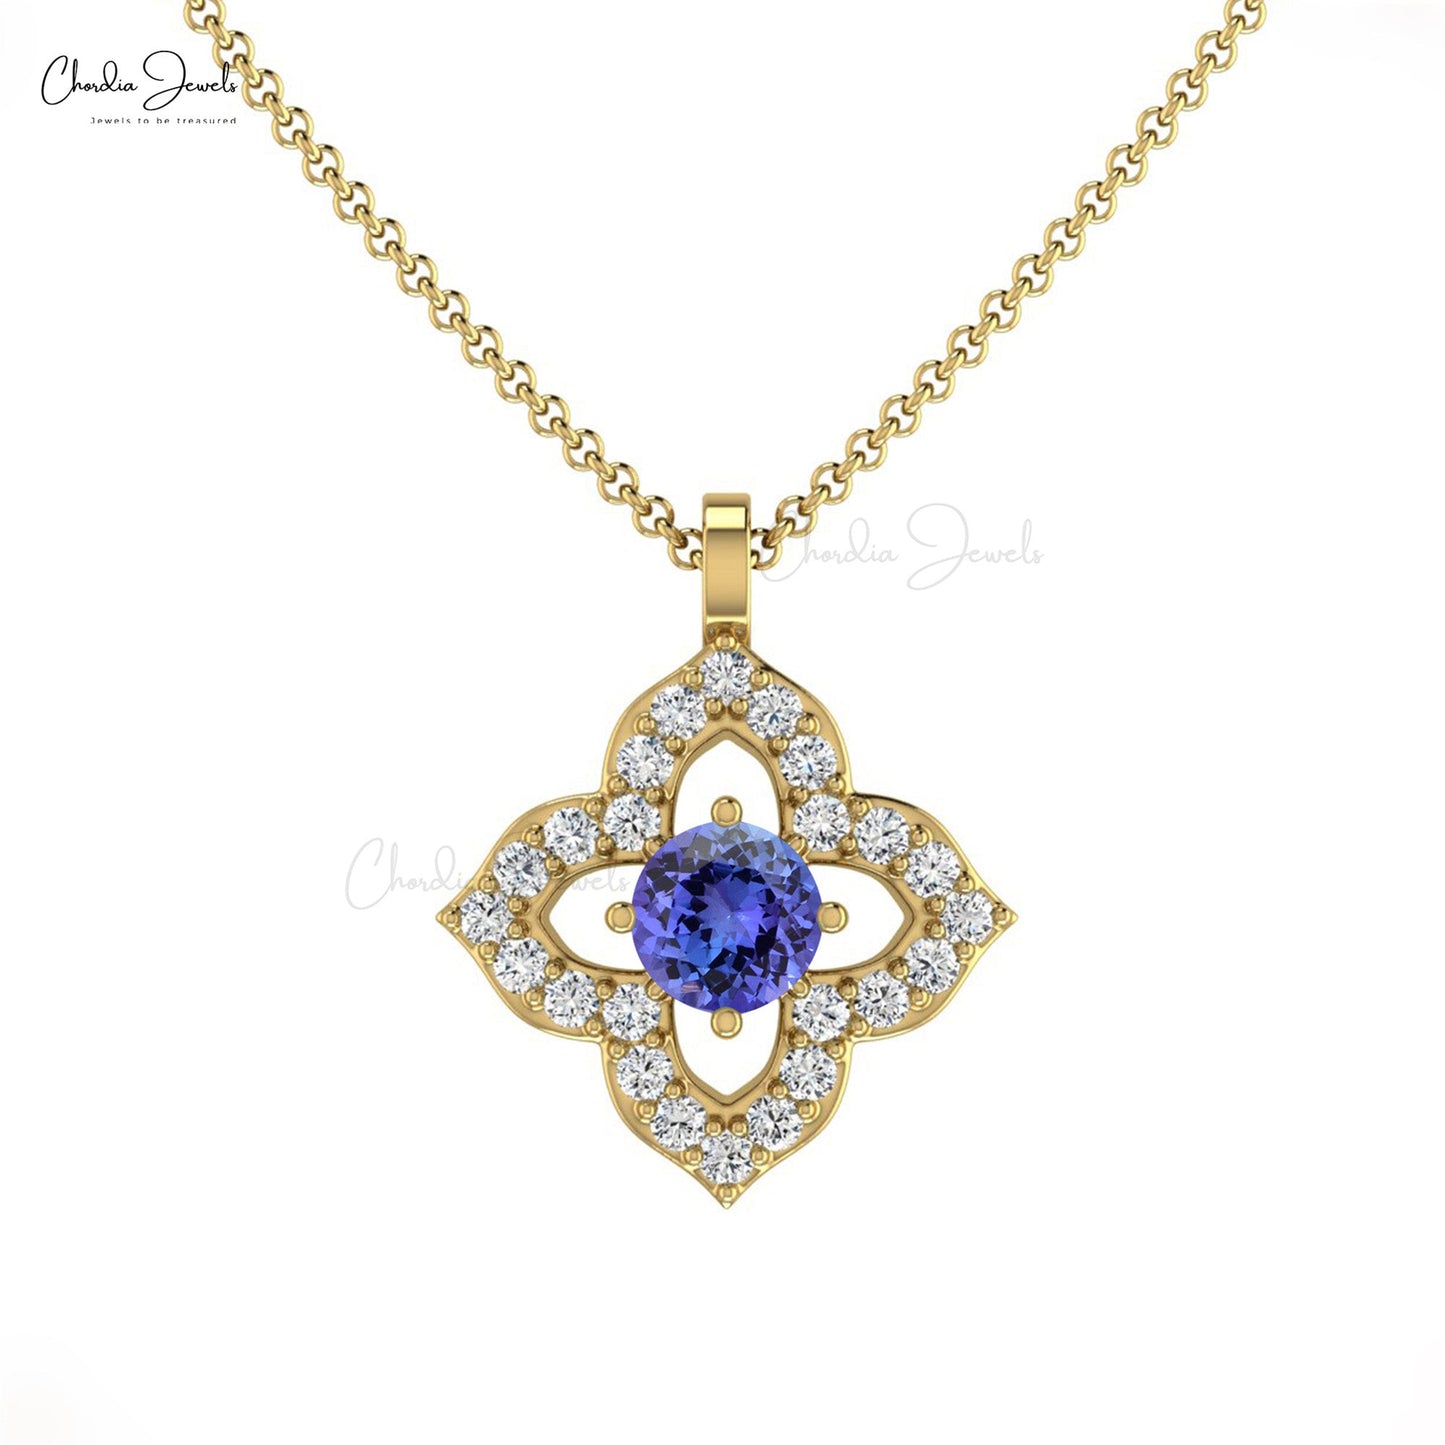 Beautiful Floral Pendant 3mm Round Natural Tanzanite Gemstone Pendant Necklace 14k Pure Gold Diamond Jewelry For Valentine's Day Gift